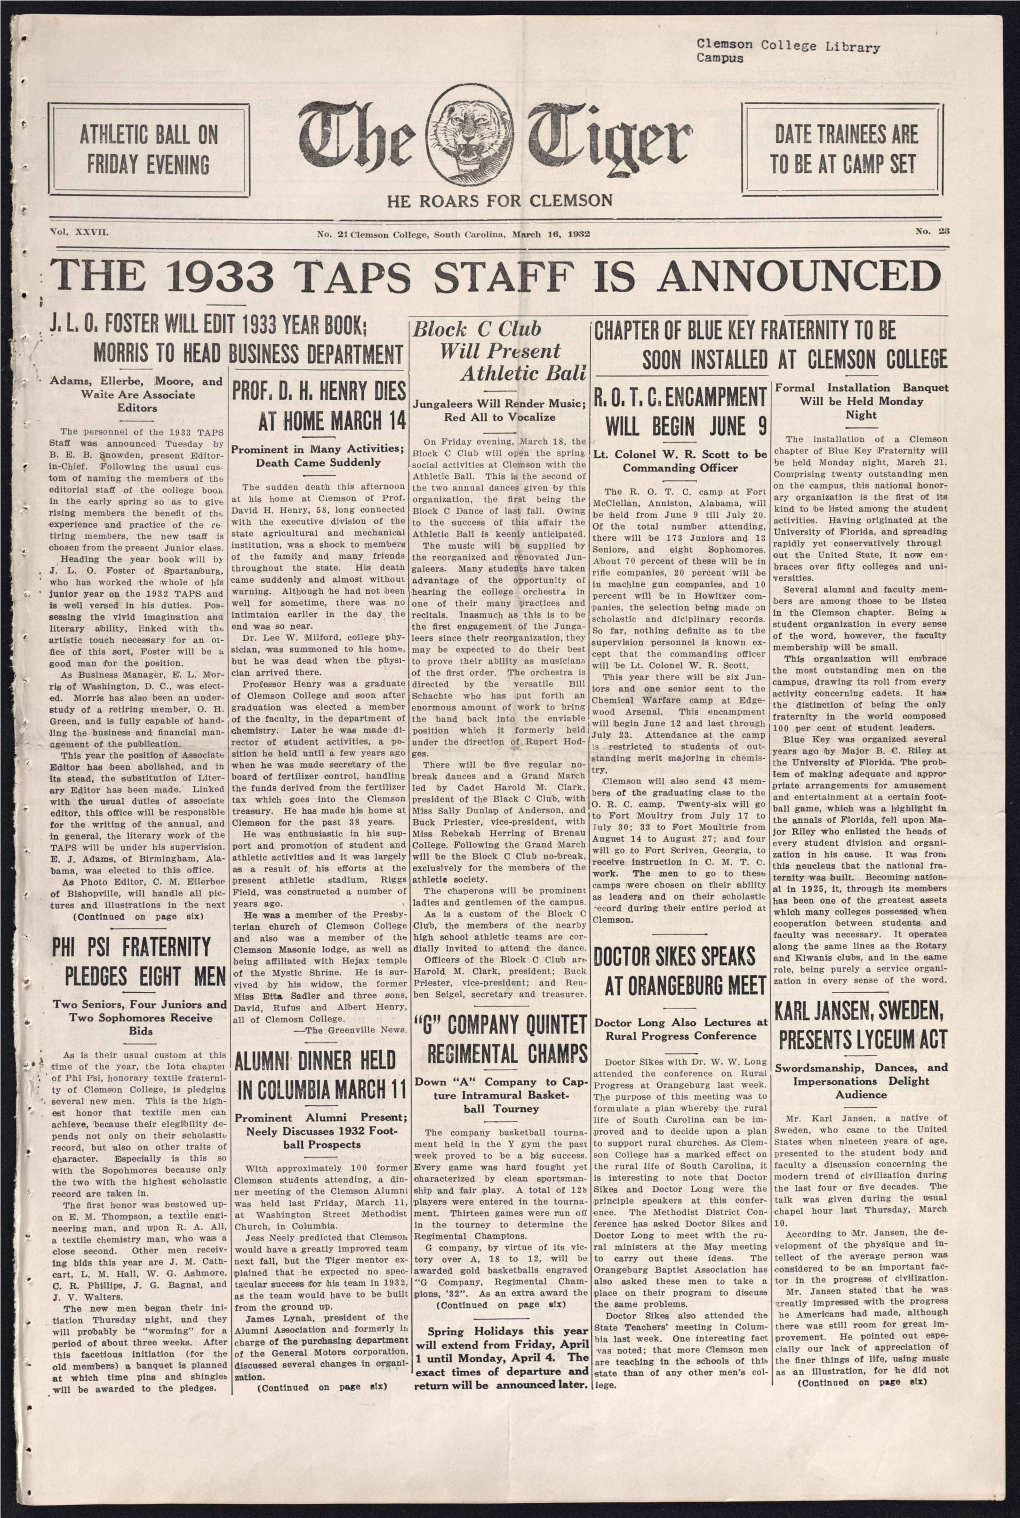 The 1933 Taps Staff Is Announced